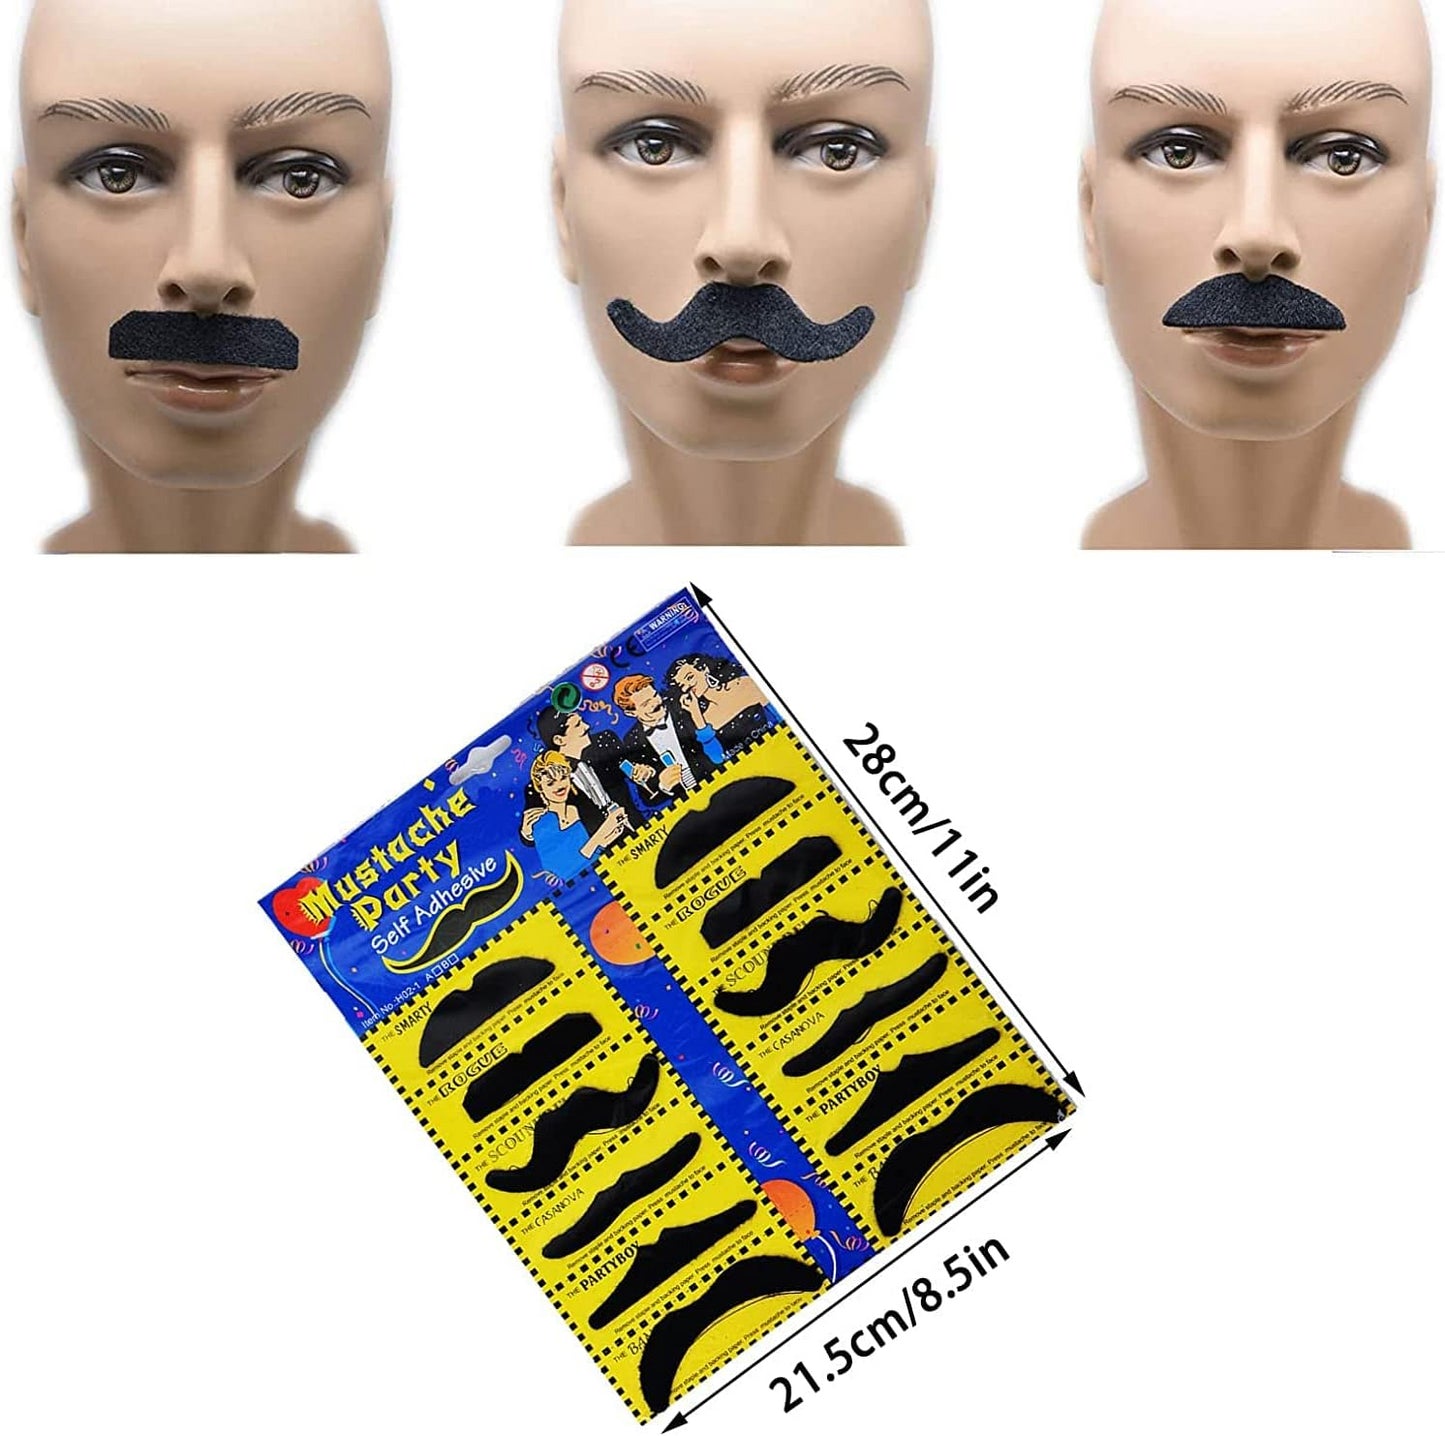 12 Self-Adhesive Fake Moustaches - Mustache Stag Hen Fancy Party Dress Accessories